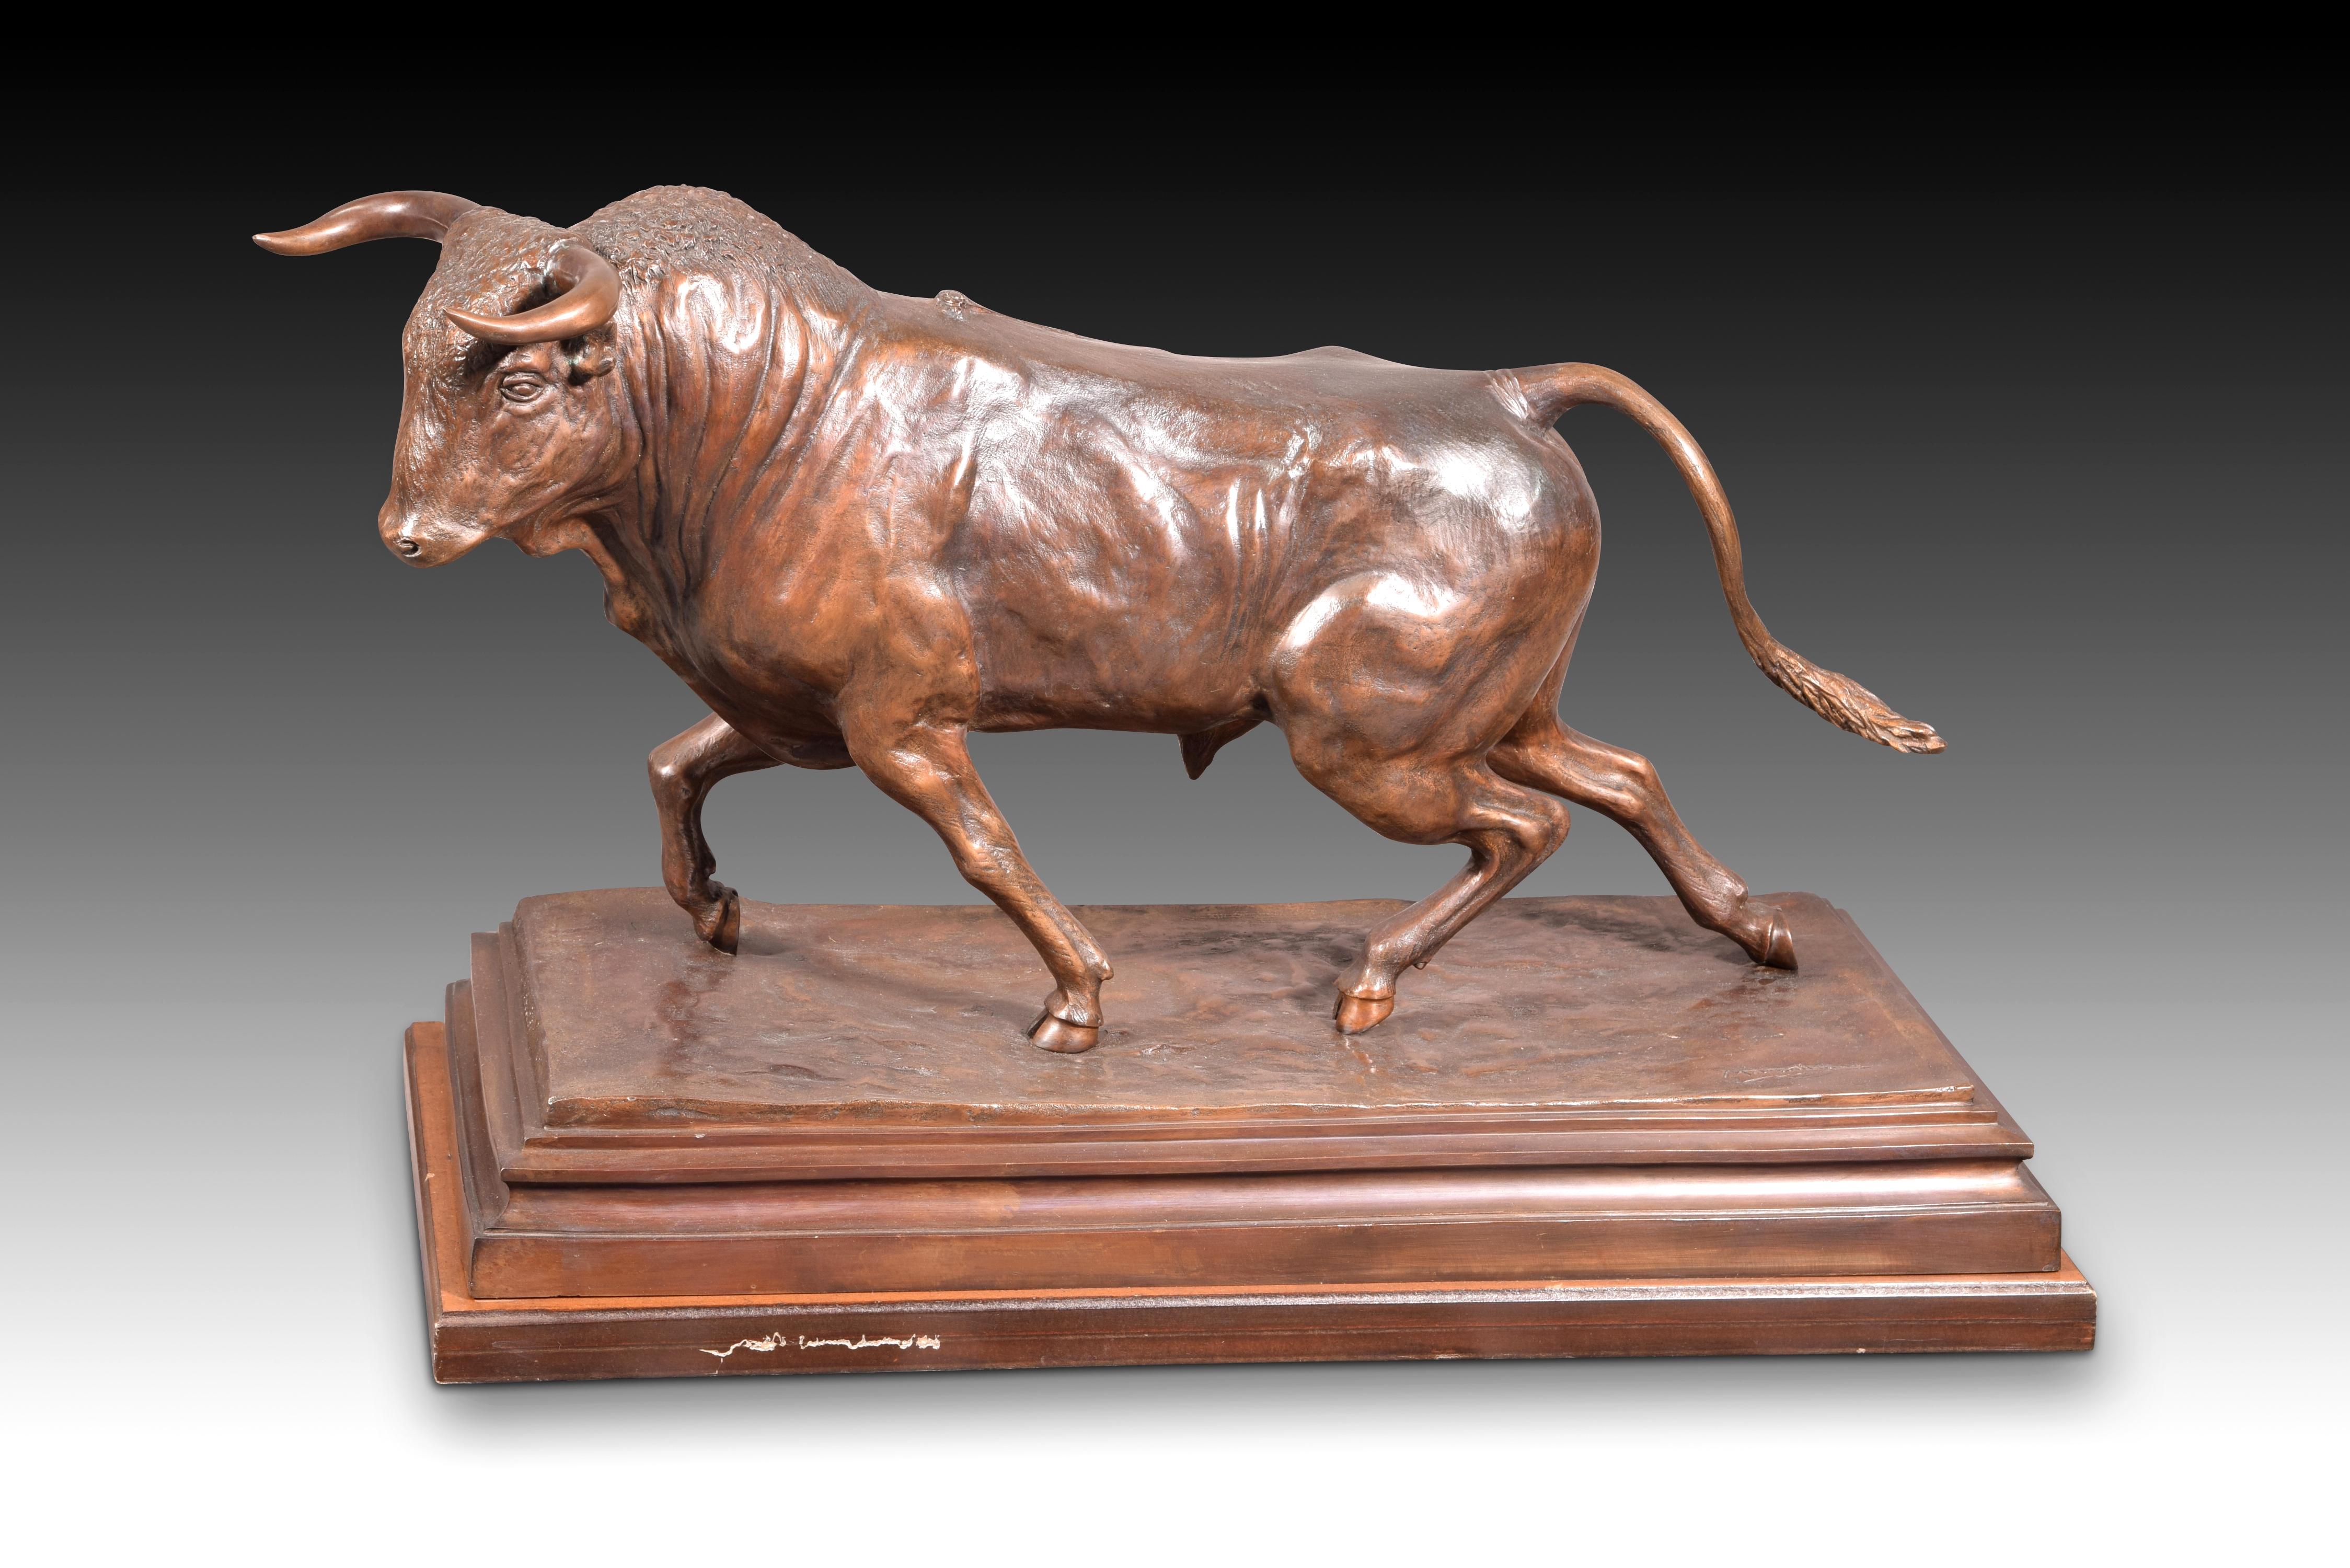 Bull. Bronze. Following the model of BENLLIURE GIL, Mariano (Valencia 1862-Madrid, 1947). 
Mariano Benlliure was a Spanish sculptor, a precocious creator both in the pictorial and sculptural fields. He trained in Valencia, Madrid, Paris, Rome,